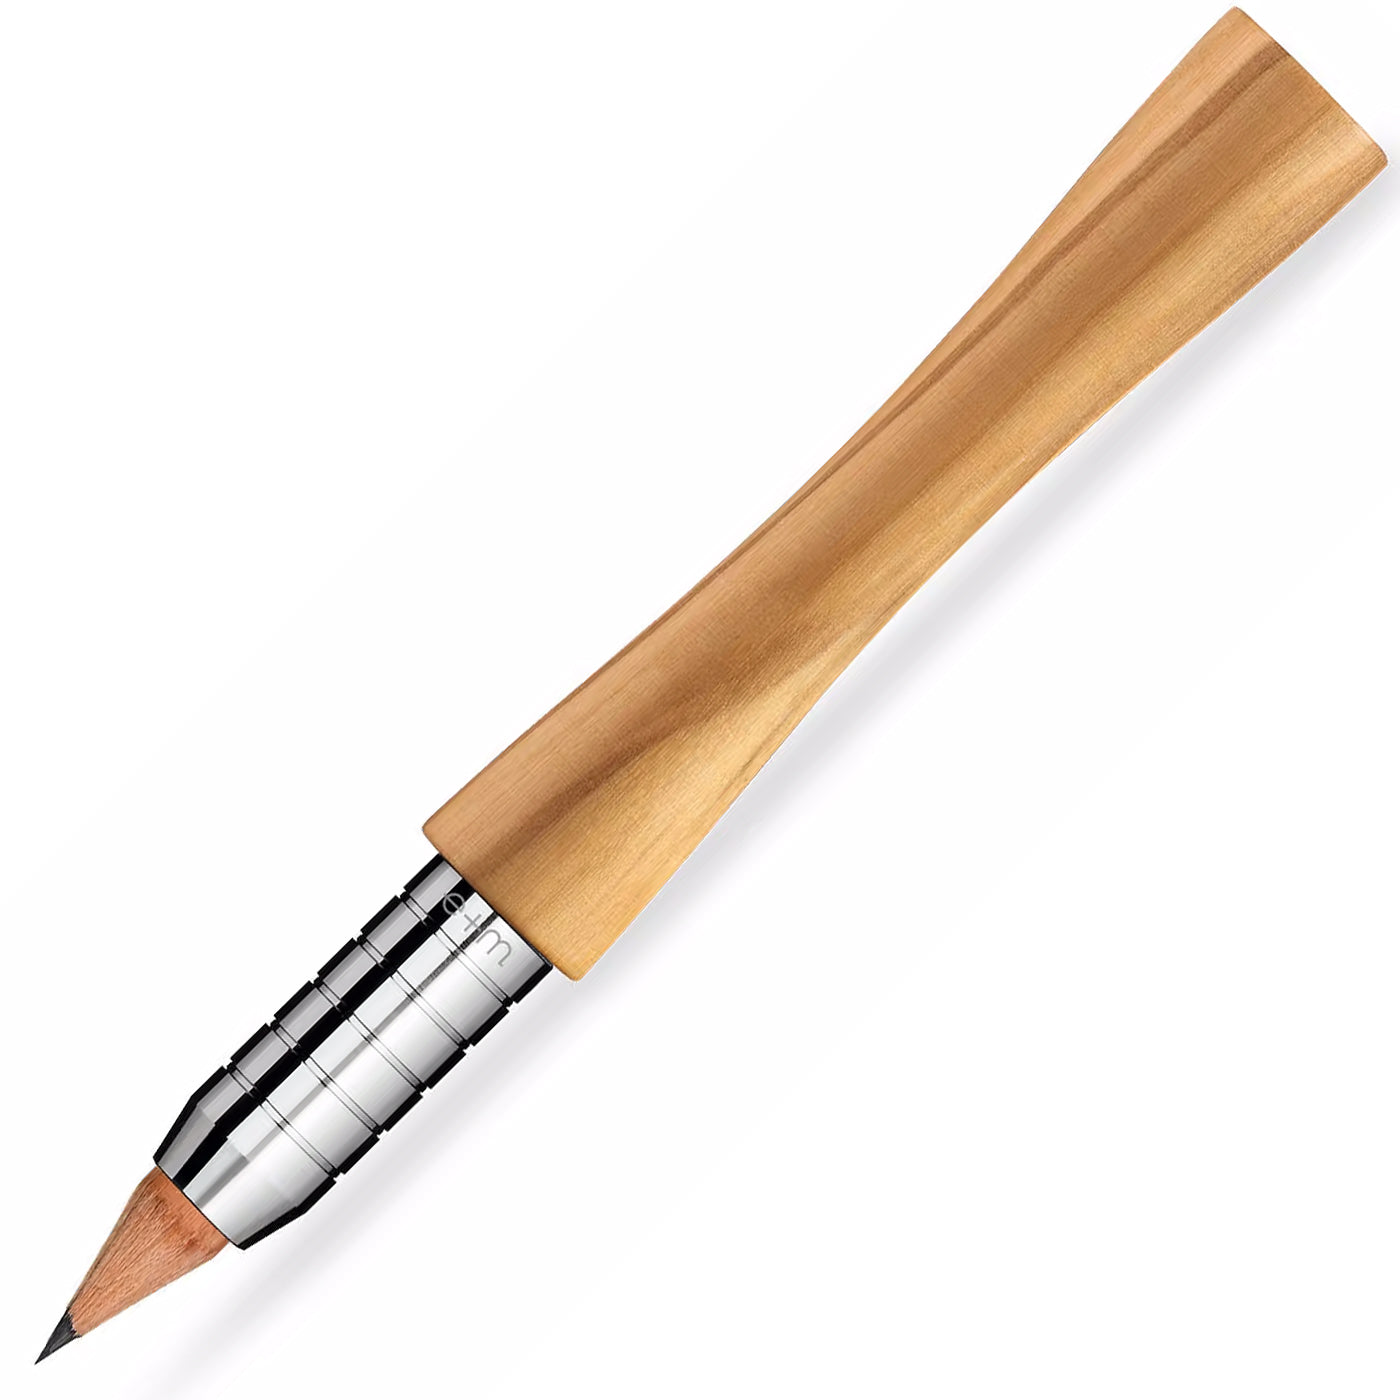 e+m Holzprodukte MOTUS + Pencil Extender with pencils - Olive Wood